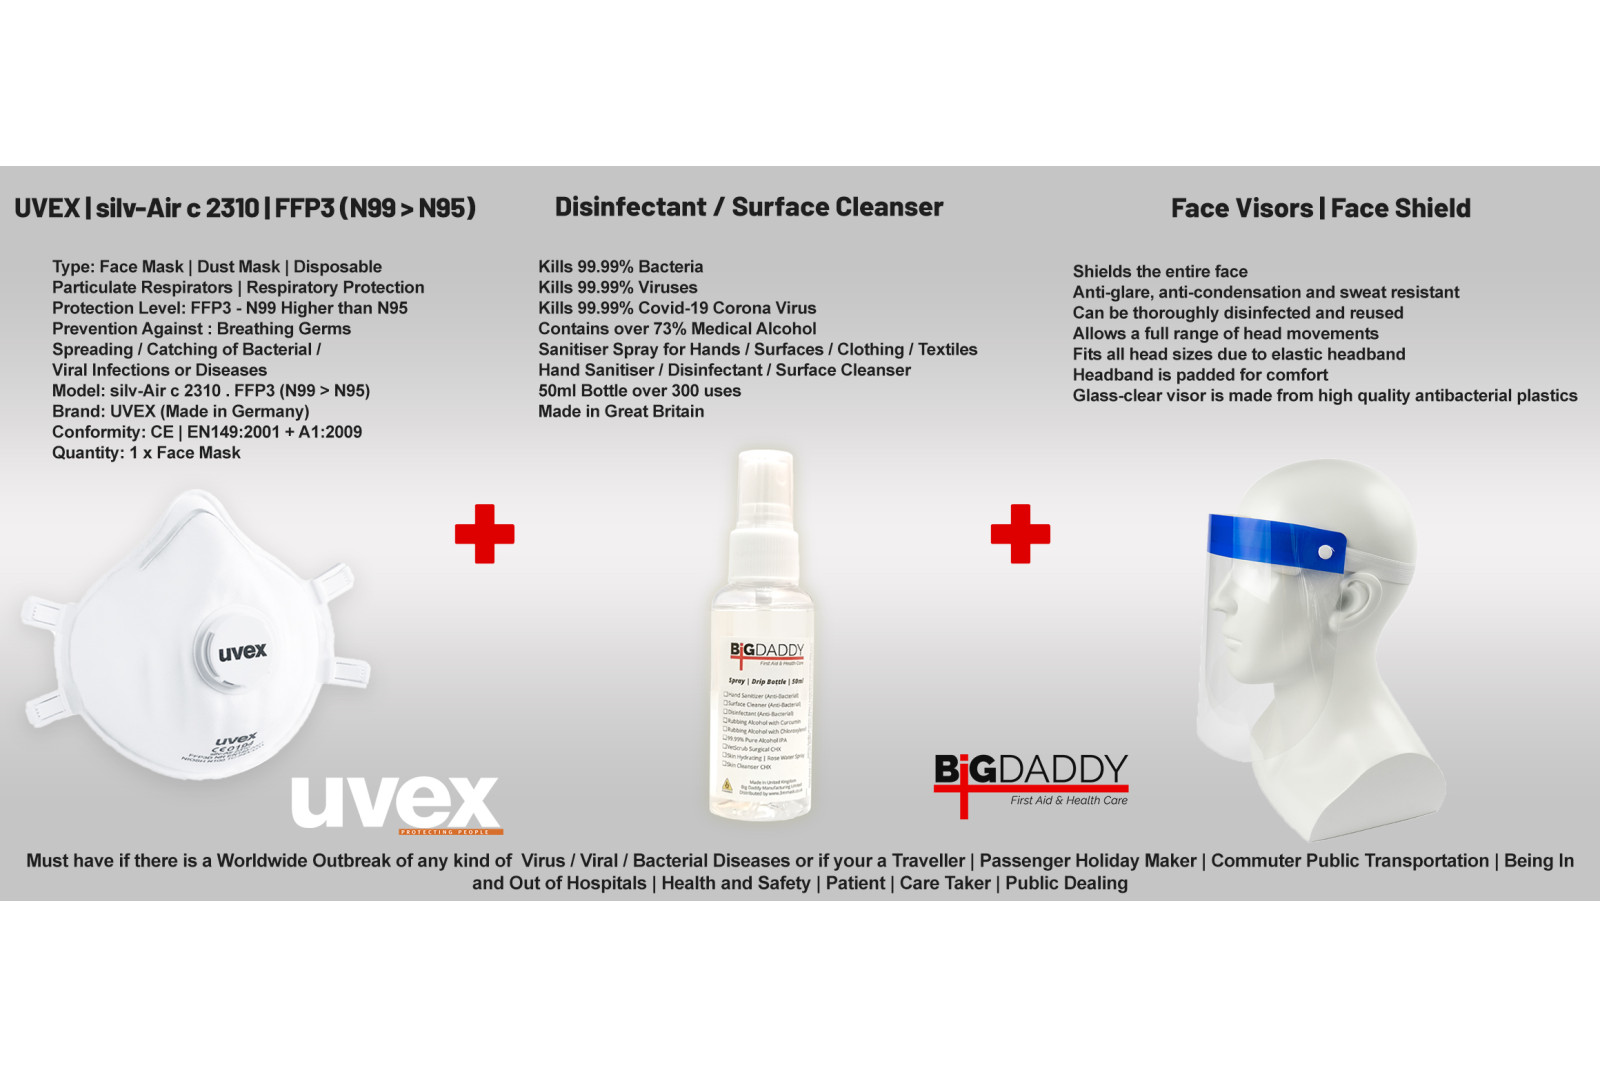 3in1 Protection Kit | Face Visor Protective Screen + Hand Disinfectant Sanitizer + UVEX silv-Air 2310 N99 > N95 FFP3 UVEX Face Mask | CORONA VIRUS COVID-19 | Particulate Respirator GERMS Filter